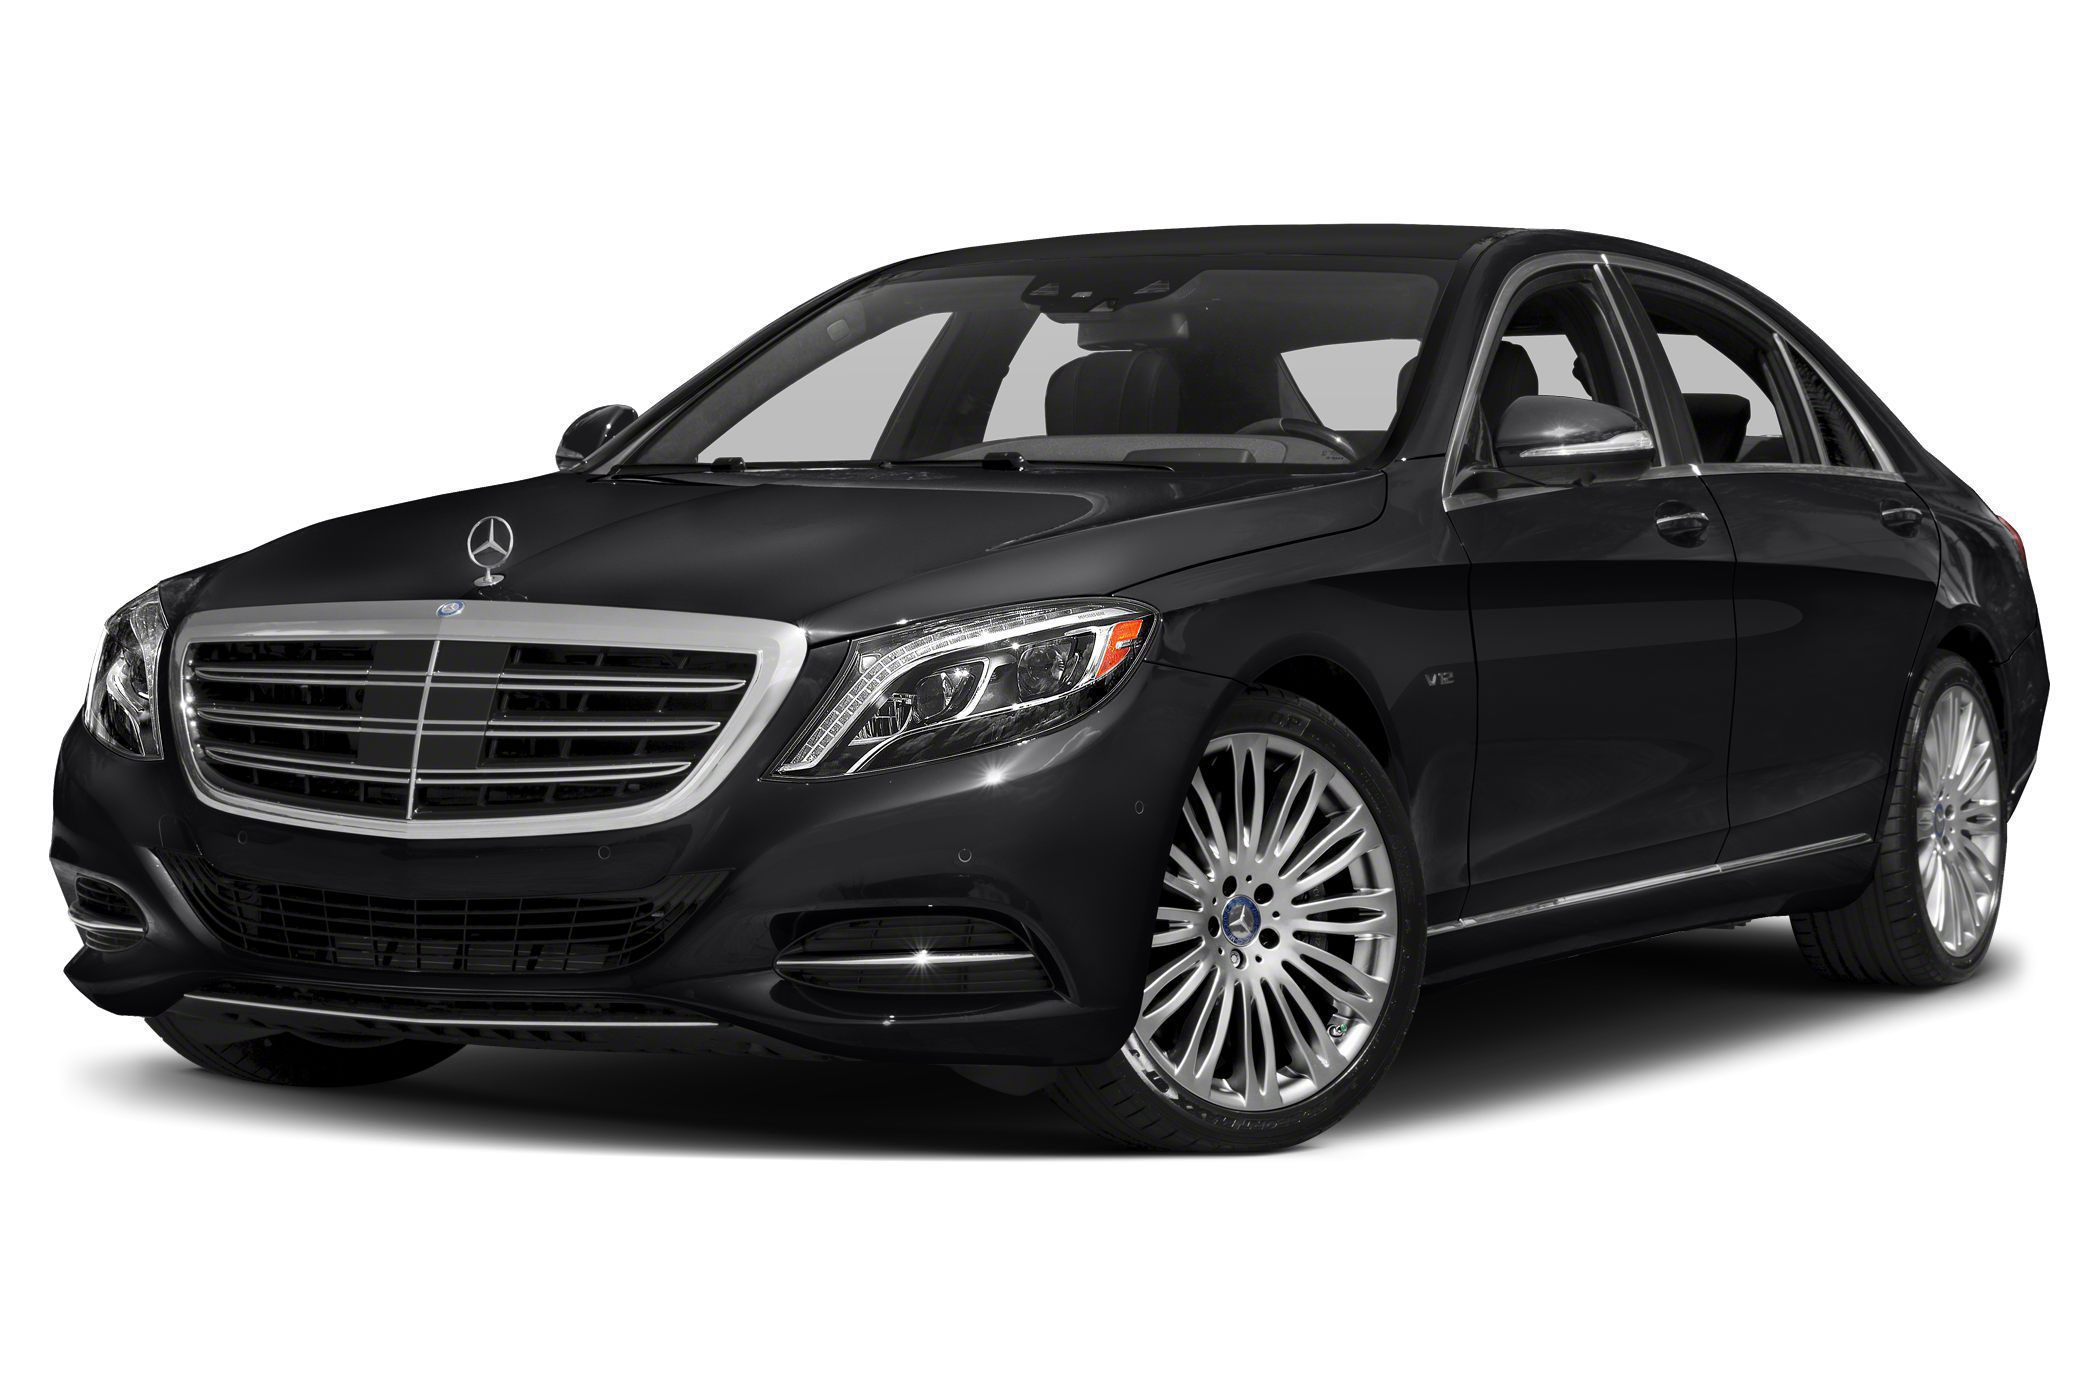 Mercedes-Benz S-class Wallpapers Images Photos Pictures ...